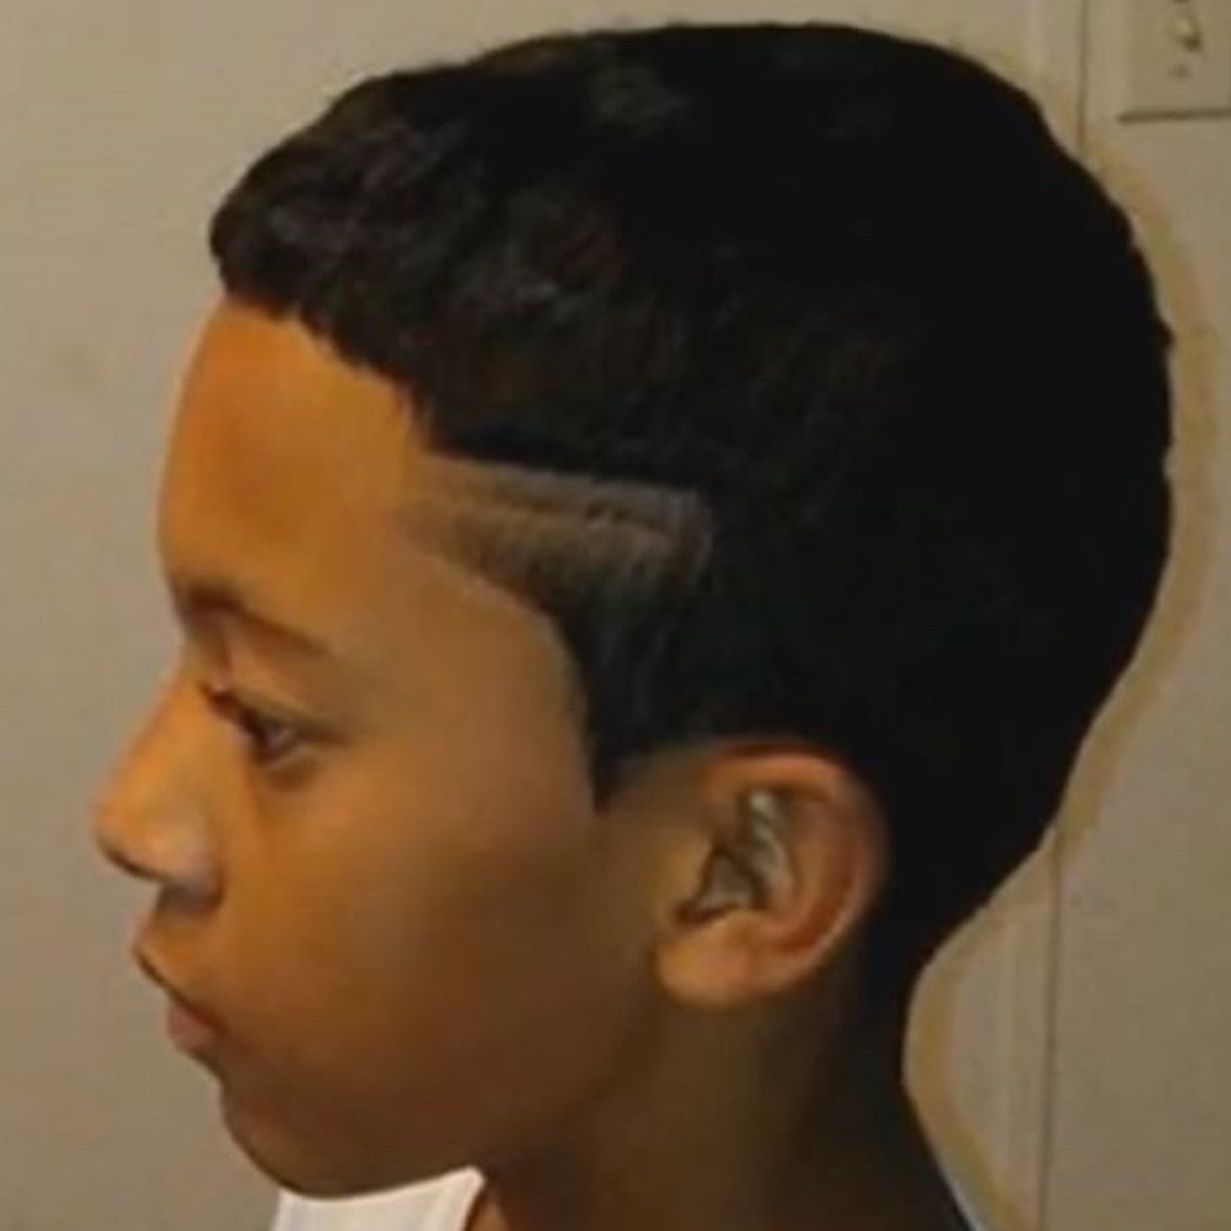 School tells this 6th-grader to fix his haircut or face suspension ...